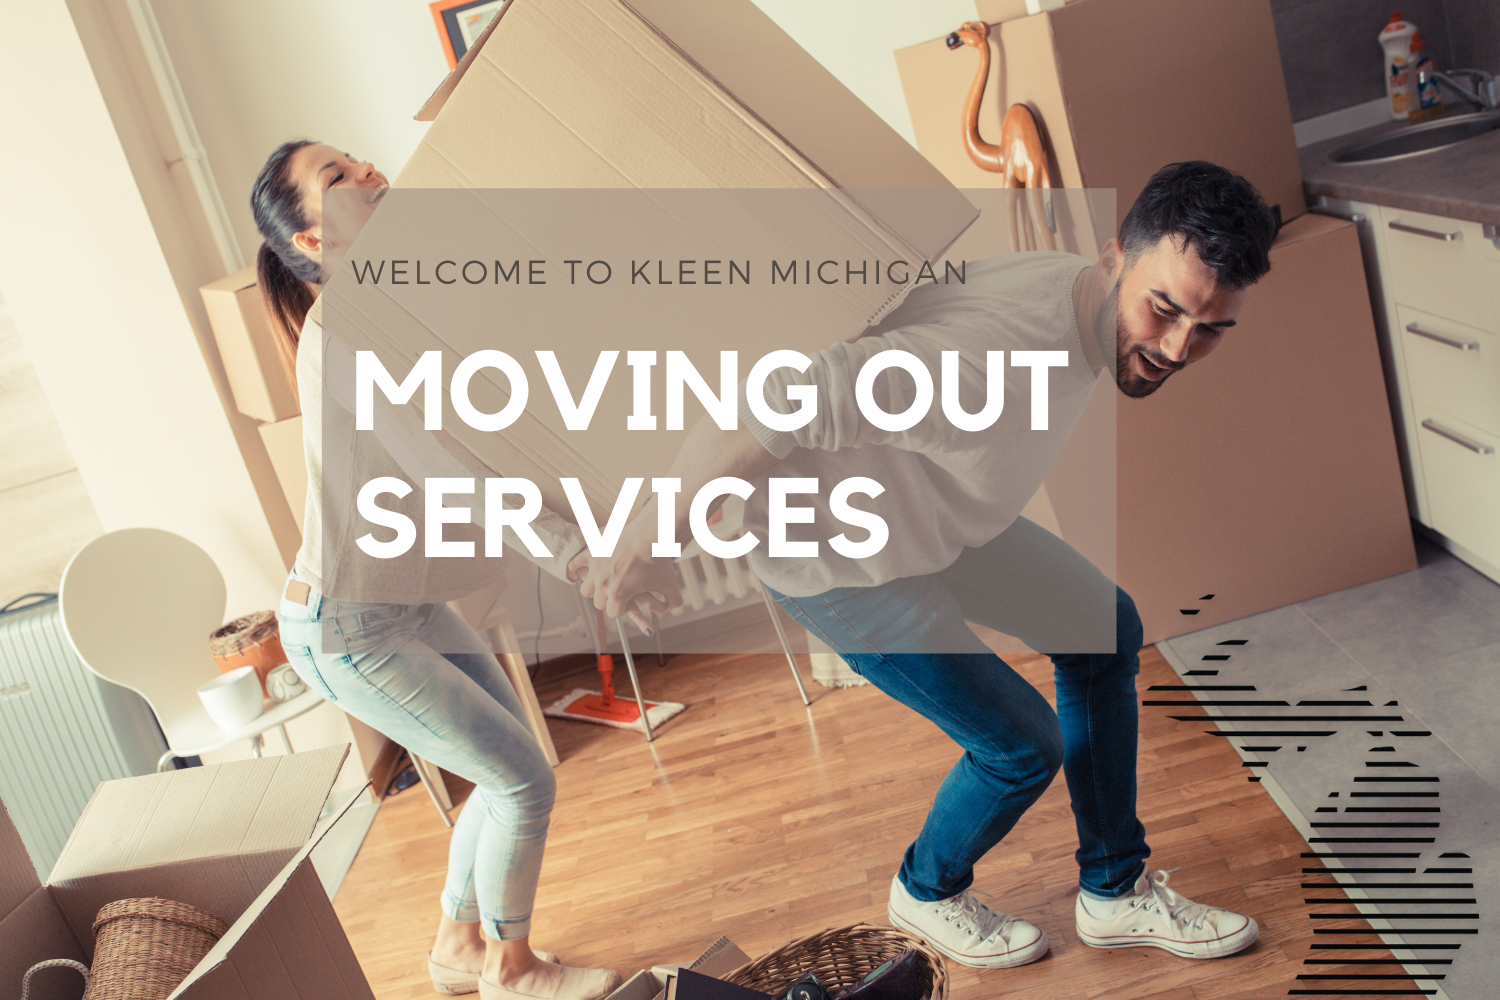 MOVING OUT SERVICES